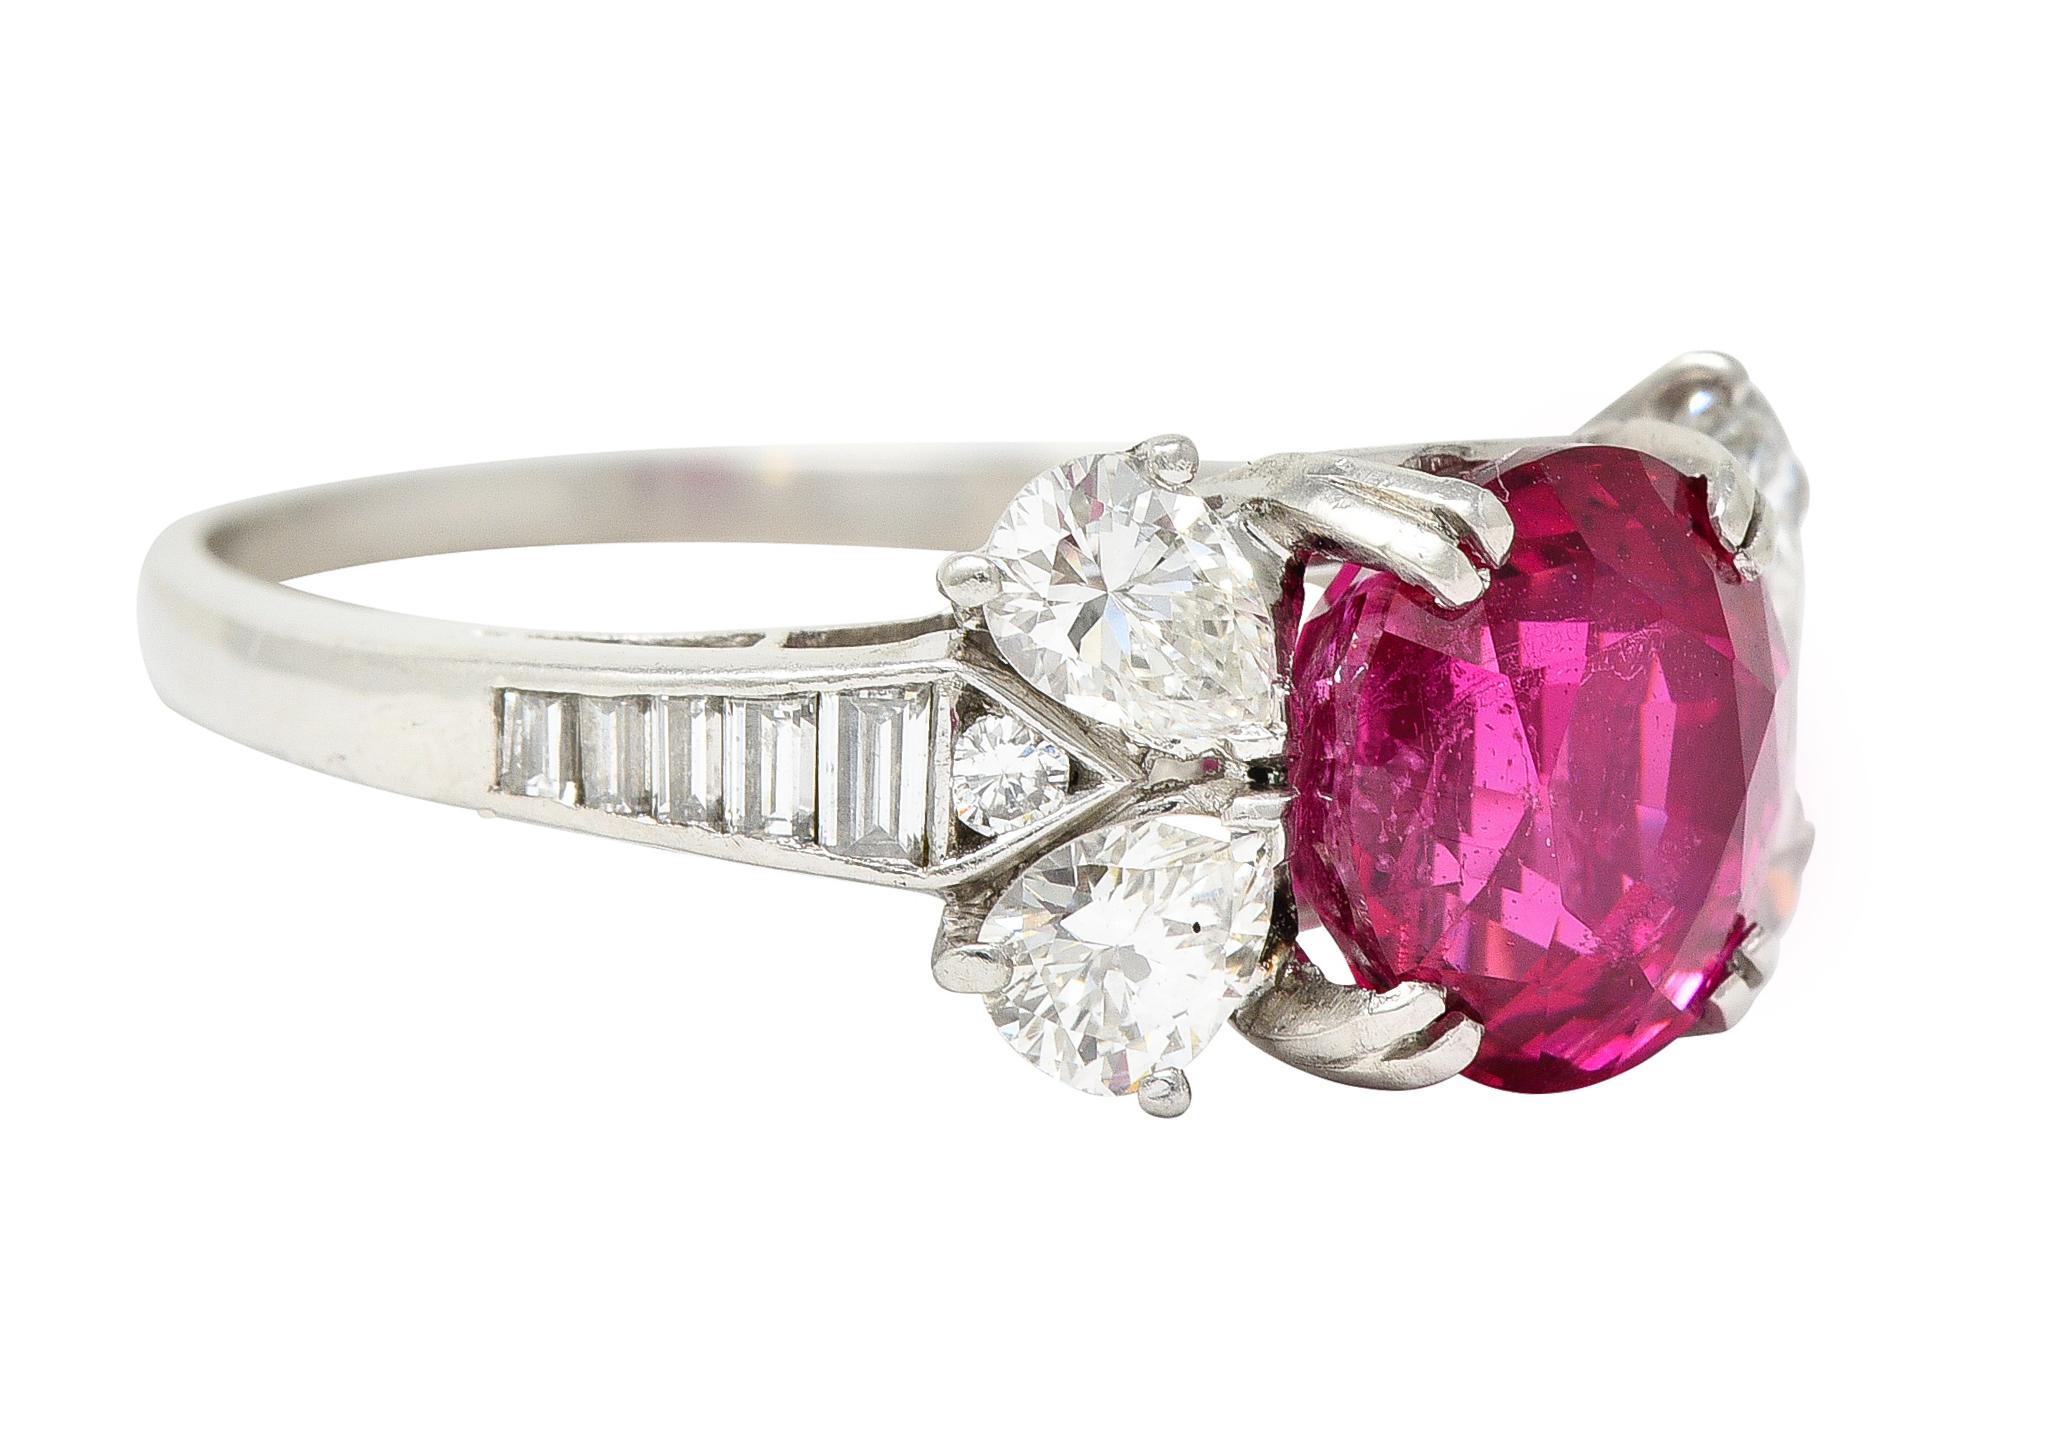 Centering an oval-cut spinel weighing 3.08 carats - transparent bright pinkish-red in color
Natural Burmese in origin with no indication of heat treatment
Set with split prongs in a basket and flanked pear cut diamonds arranged as bowtie motif
Prong